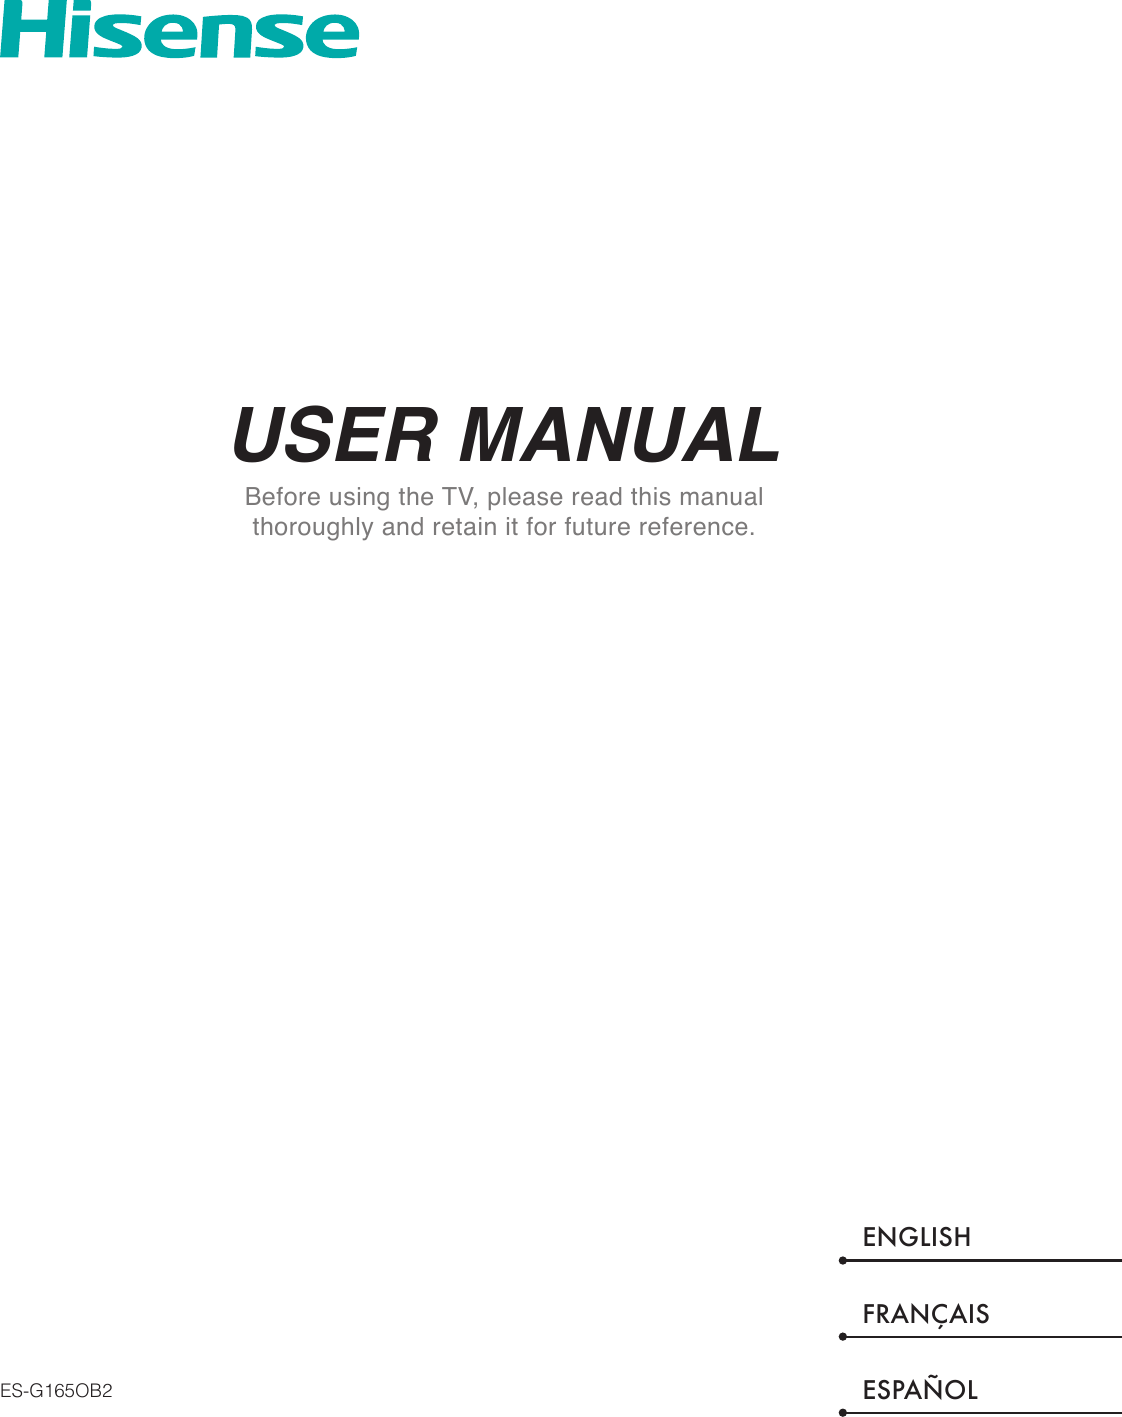 USER MANUALBefore using the TV, please read this manual thoroughly and retain it for future reference.ENGLISHFRANÇAISESPAÑOLES-G165OB2